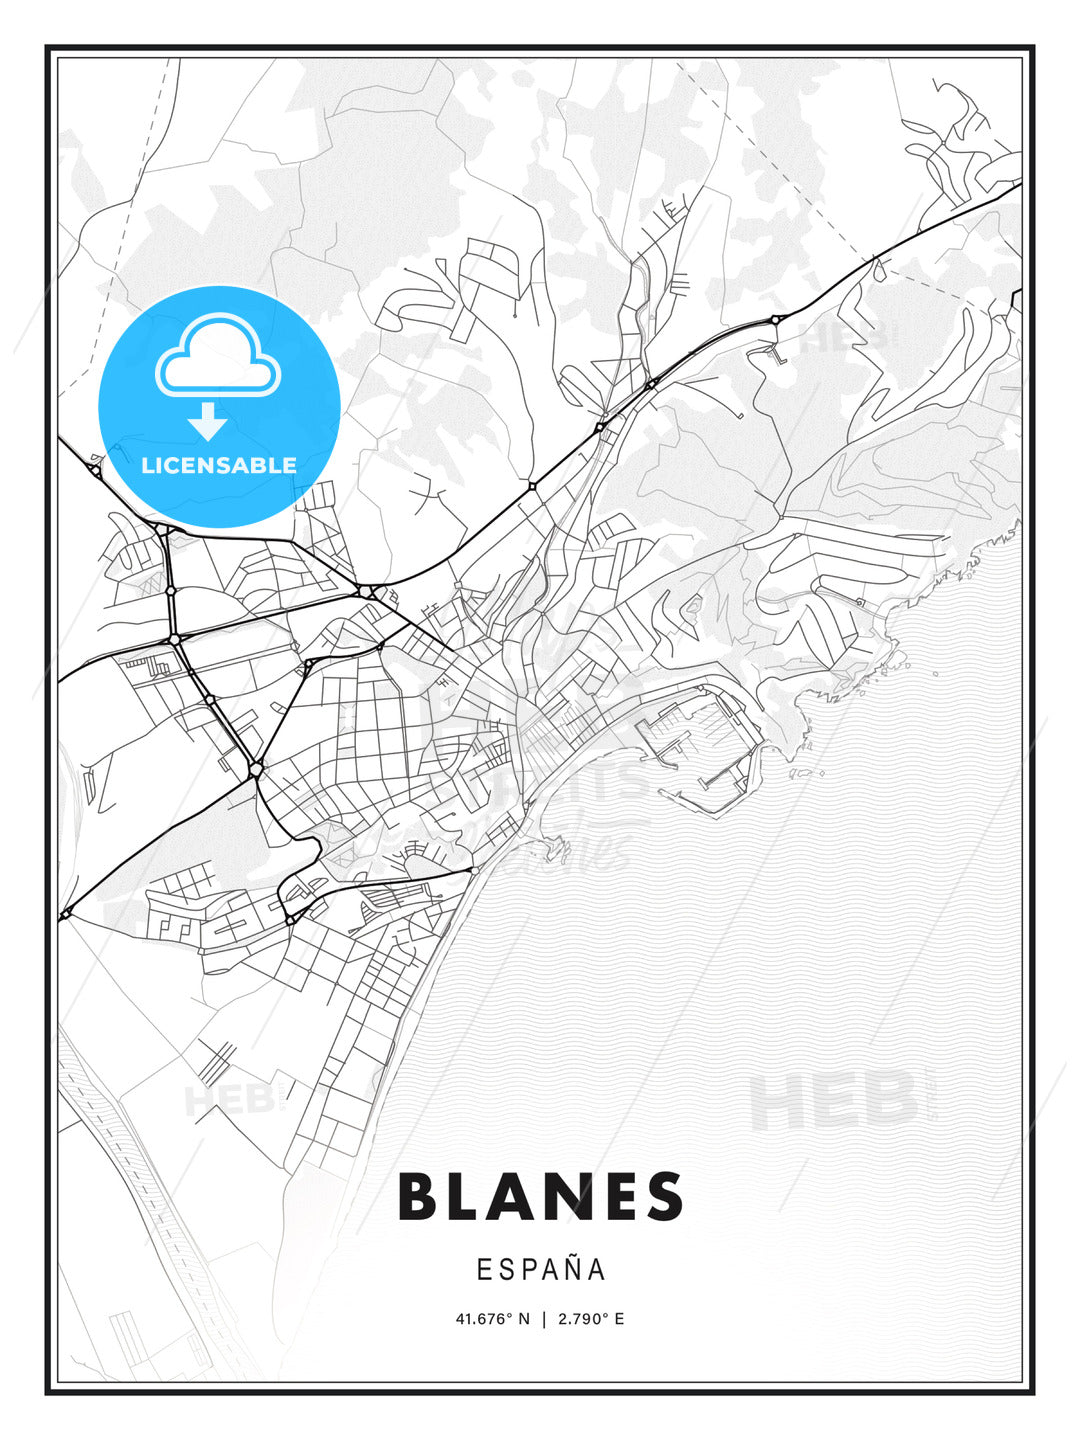 Blanes, Spain, Modern Print Template in Various Formats - HEBSTREITS Sketches